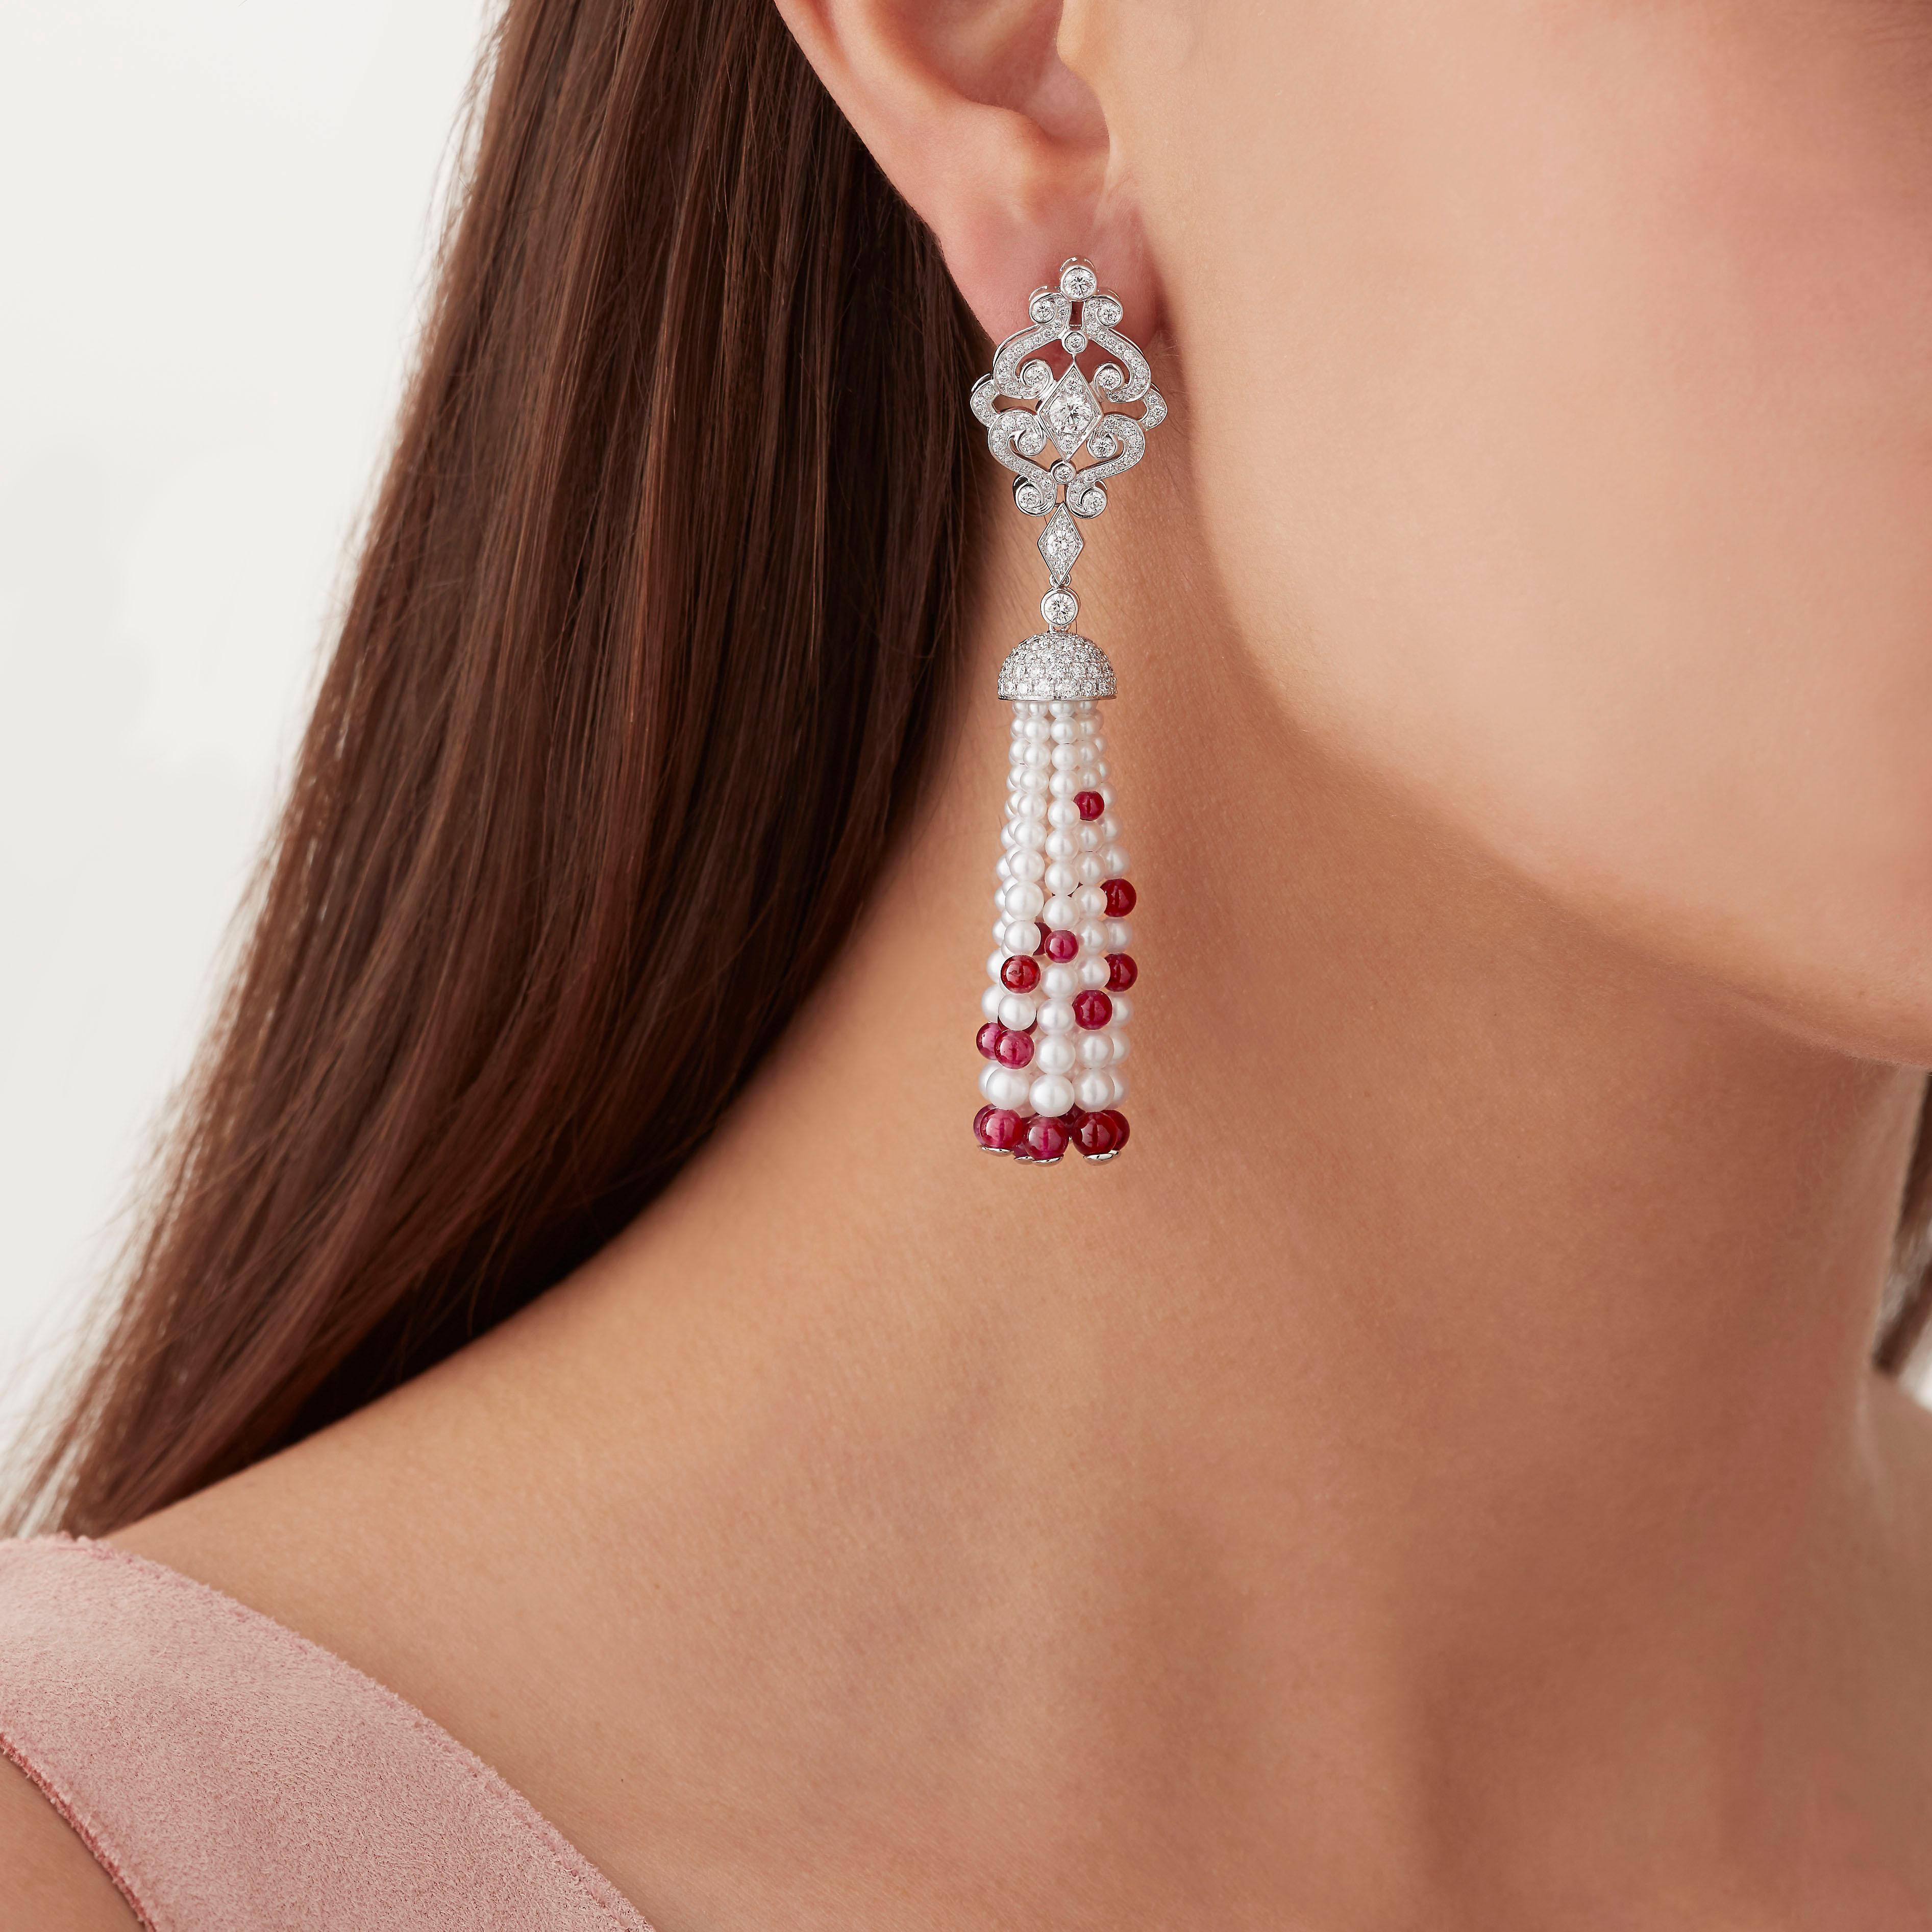 Garrard 'Albemarle' 18 Karat White Gold Diamond and Ruby Beaded Tassell Earrings In New Condition For Sale In London, London